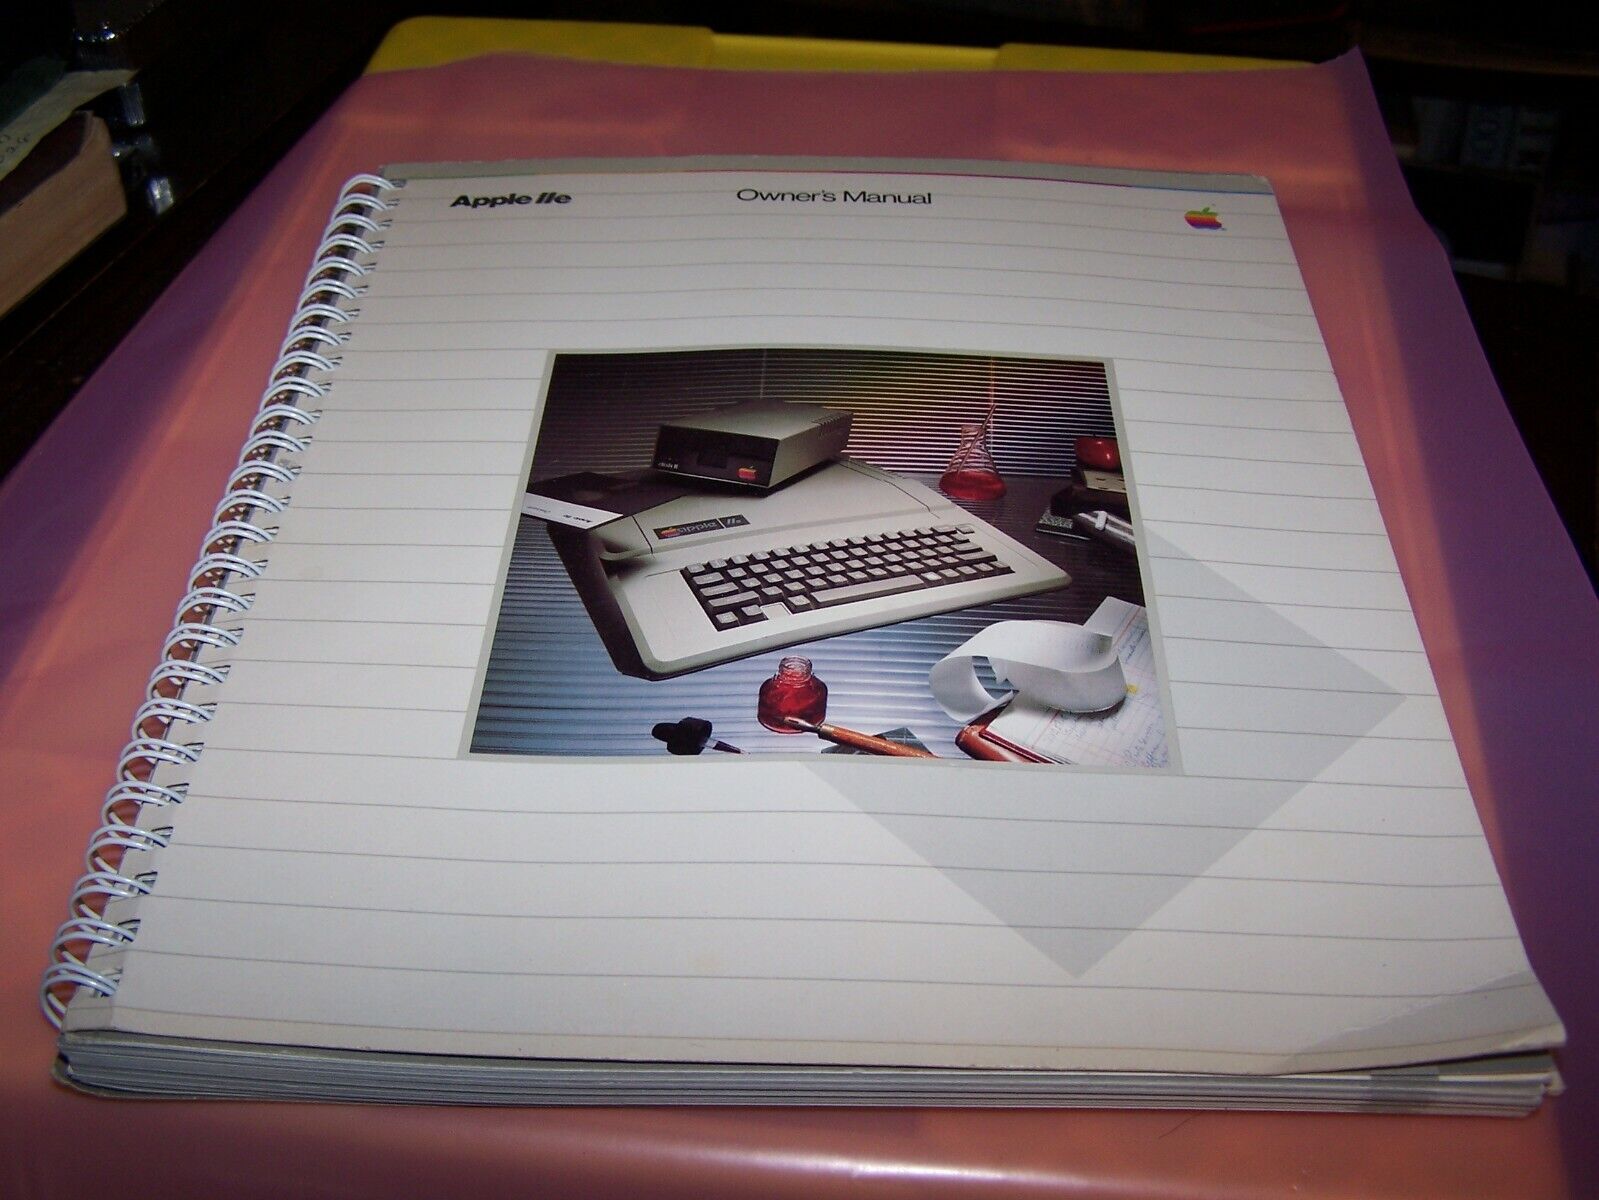 Apple Iie Owner's Manual 030-0356-A - 1982 140 Pages